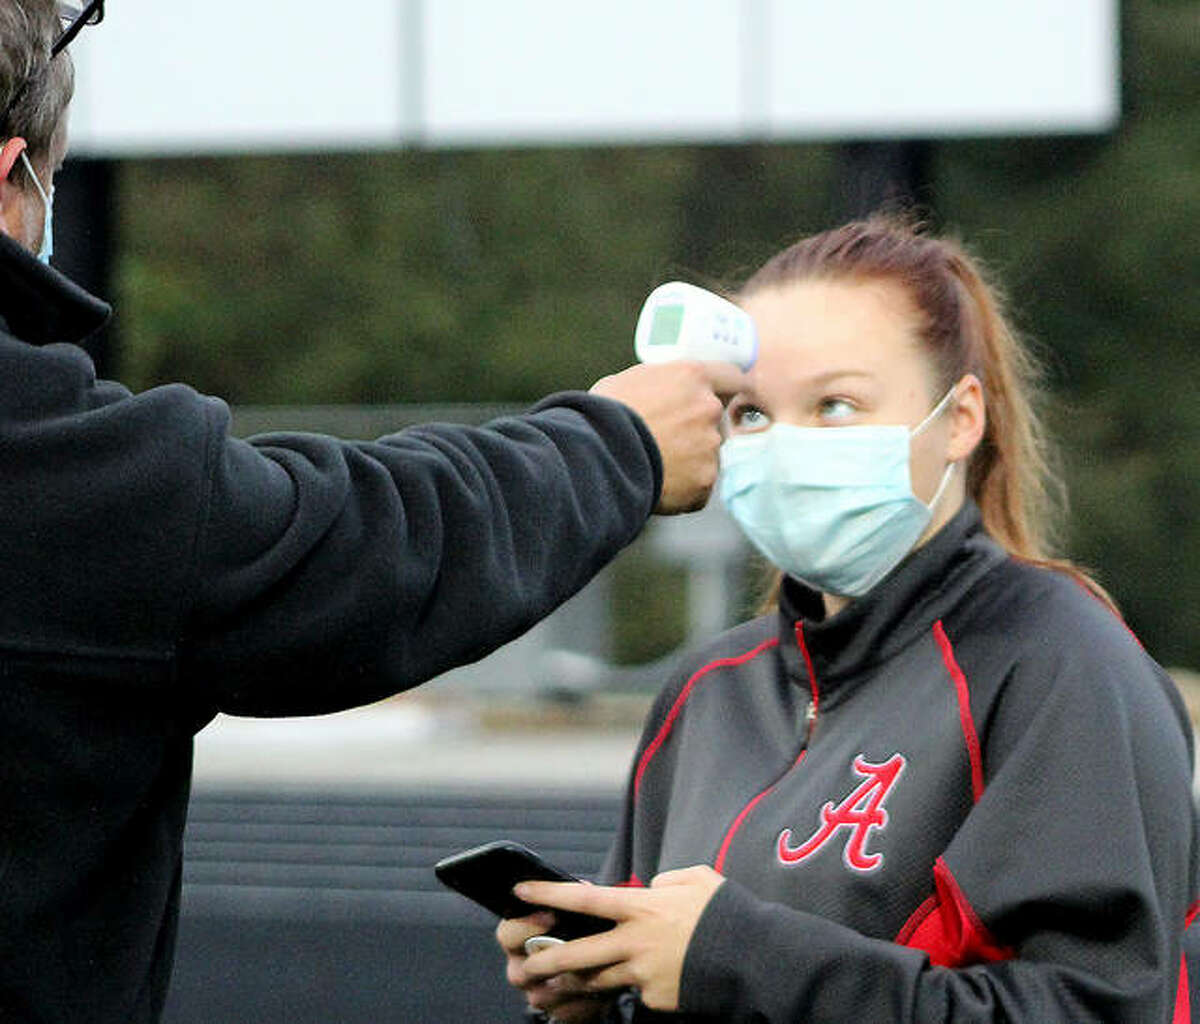 Alton soccer player Addison Miller has her temperature checked as part of the coronavirus protocol prior to a practice session last spring. On Wednesday evening, the Illinois High School association said it will require masks for all athletes participating this fall in indoor sports, including practices. Swimmers and divers will not have to wear masks during competition, but will be required to wear them when they are not competing.